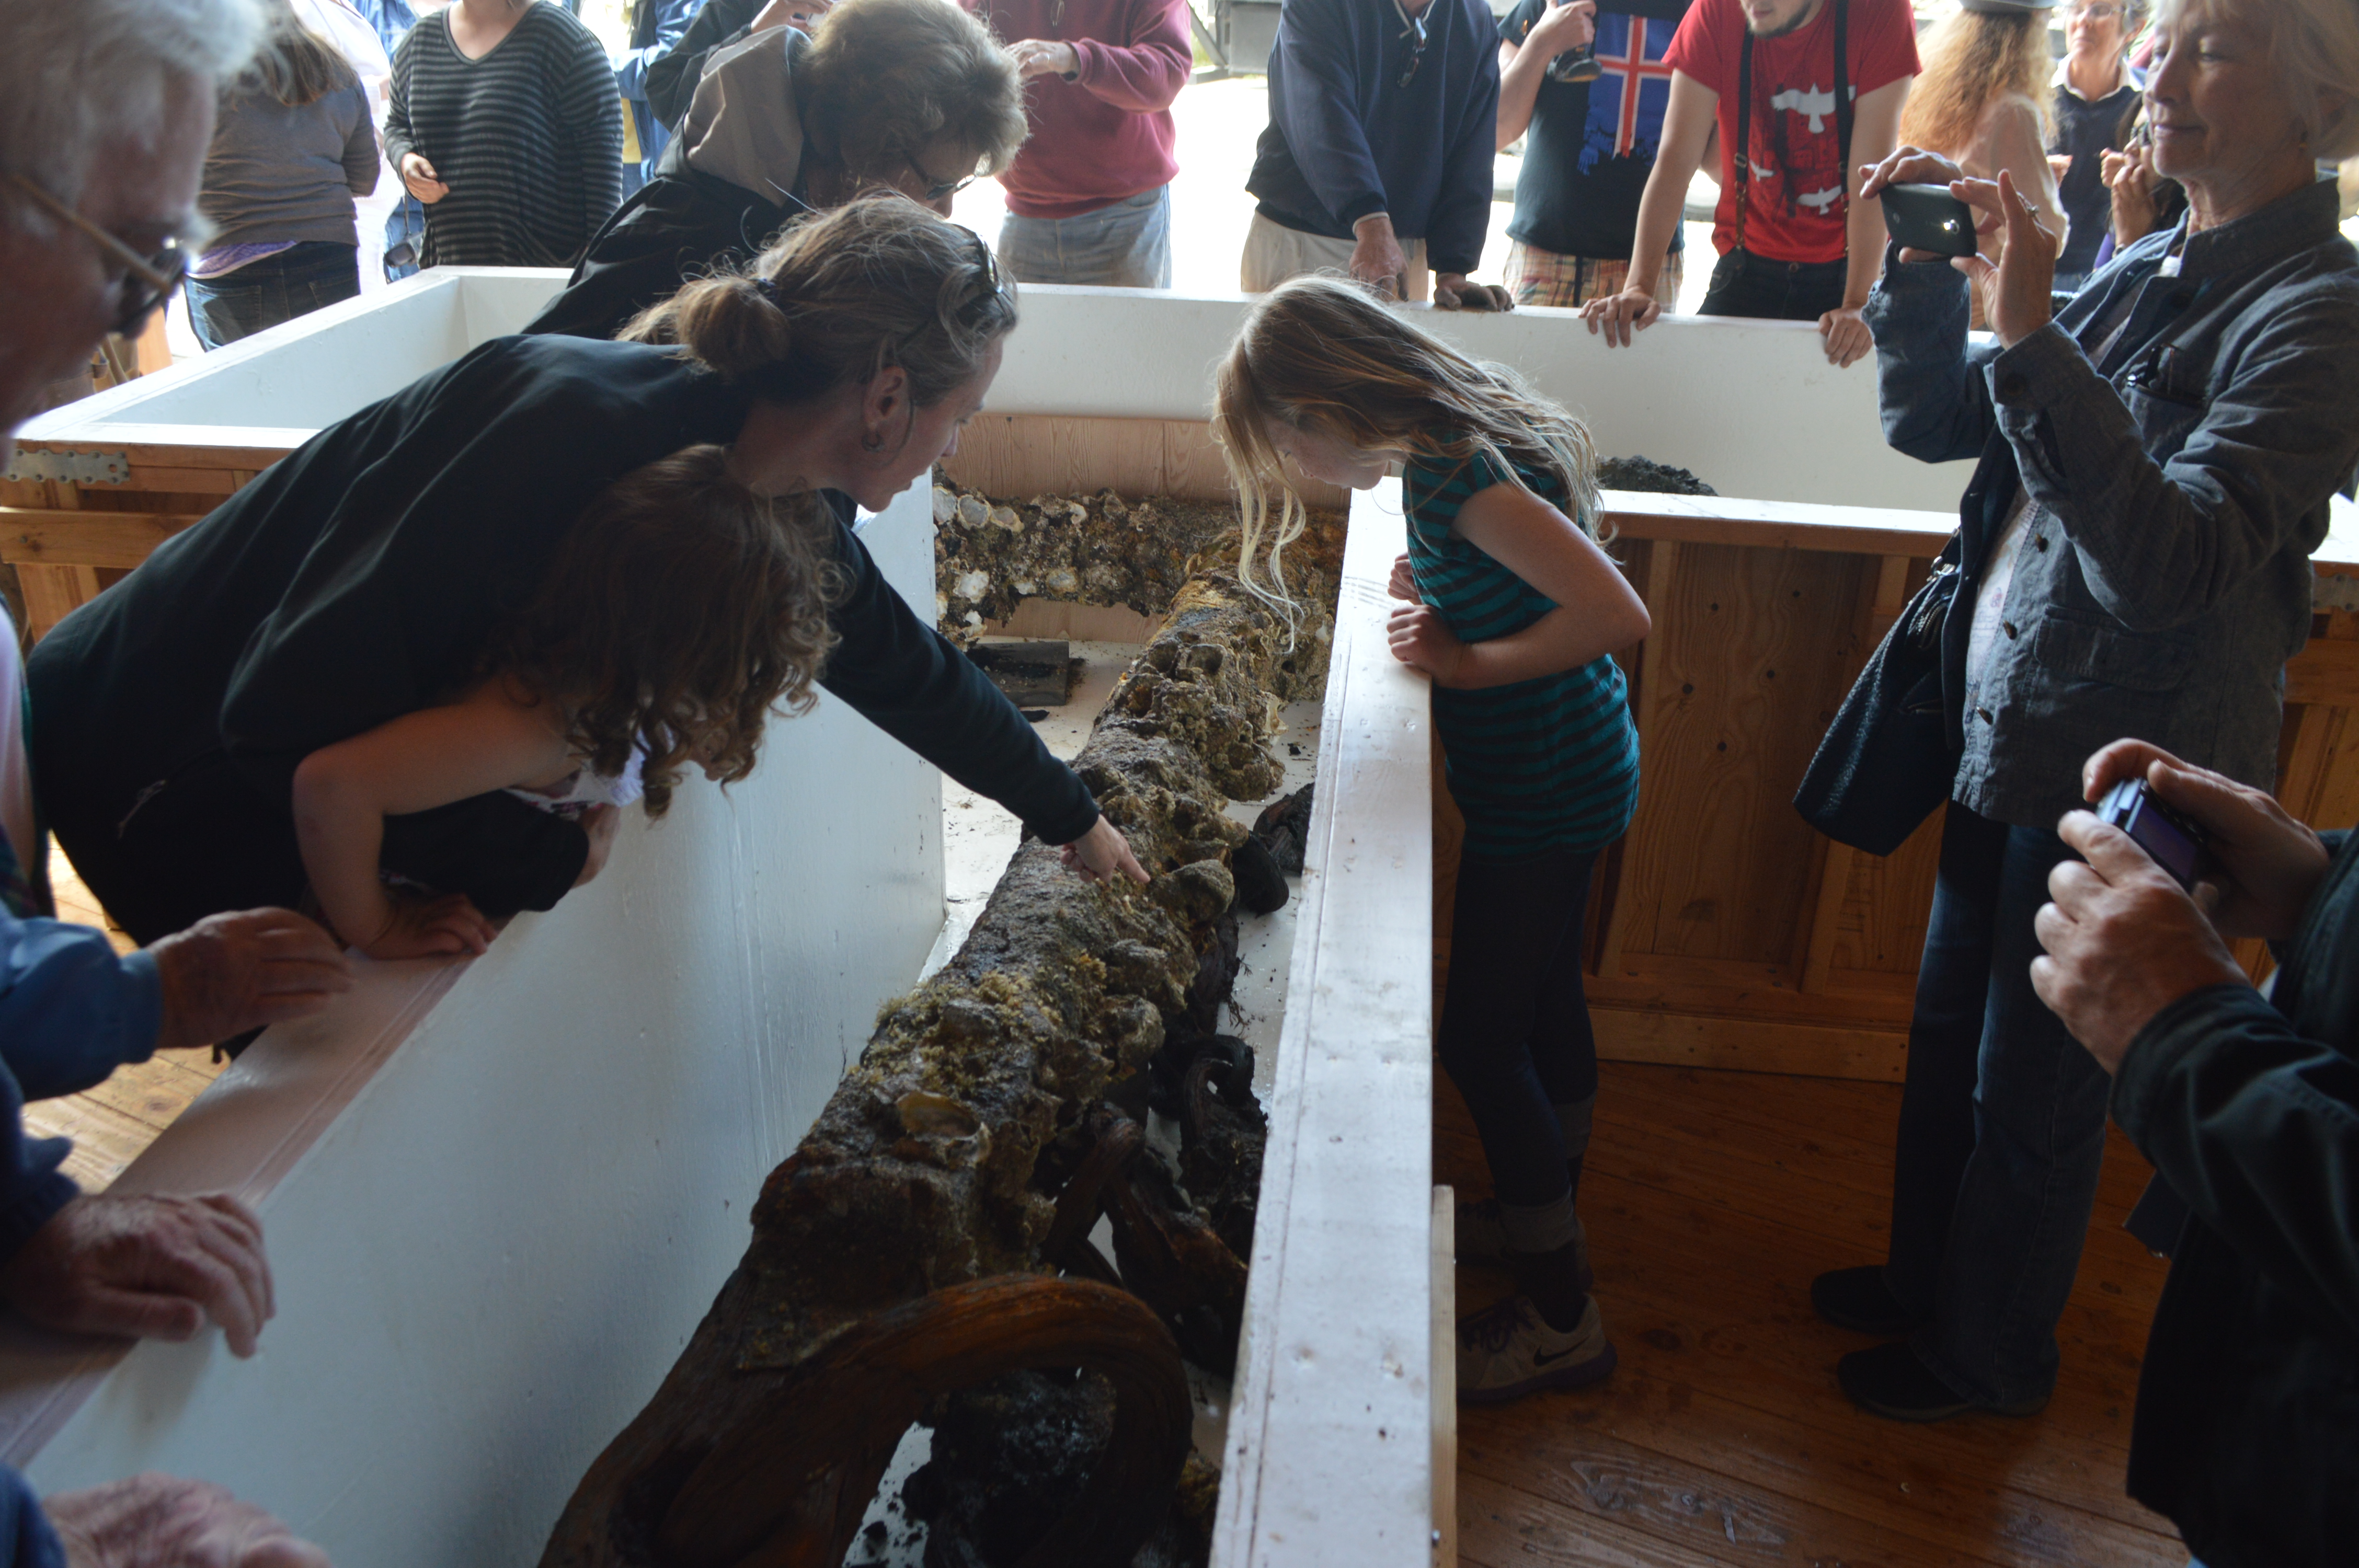 First-day crowds at the Northwest Maritime Center in Port Townsend examine the anchor in its specially constructed display case. Joe Smillie/Peninsula Daily News